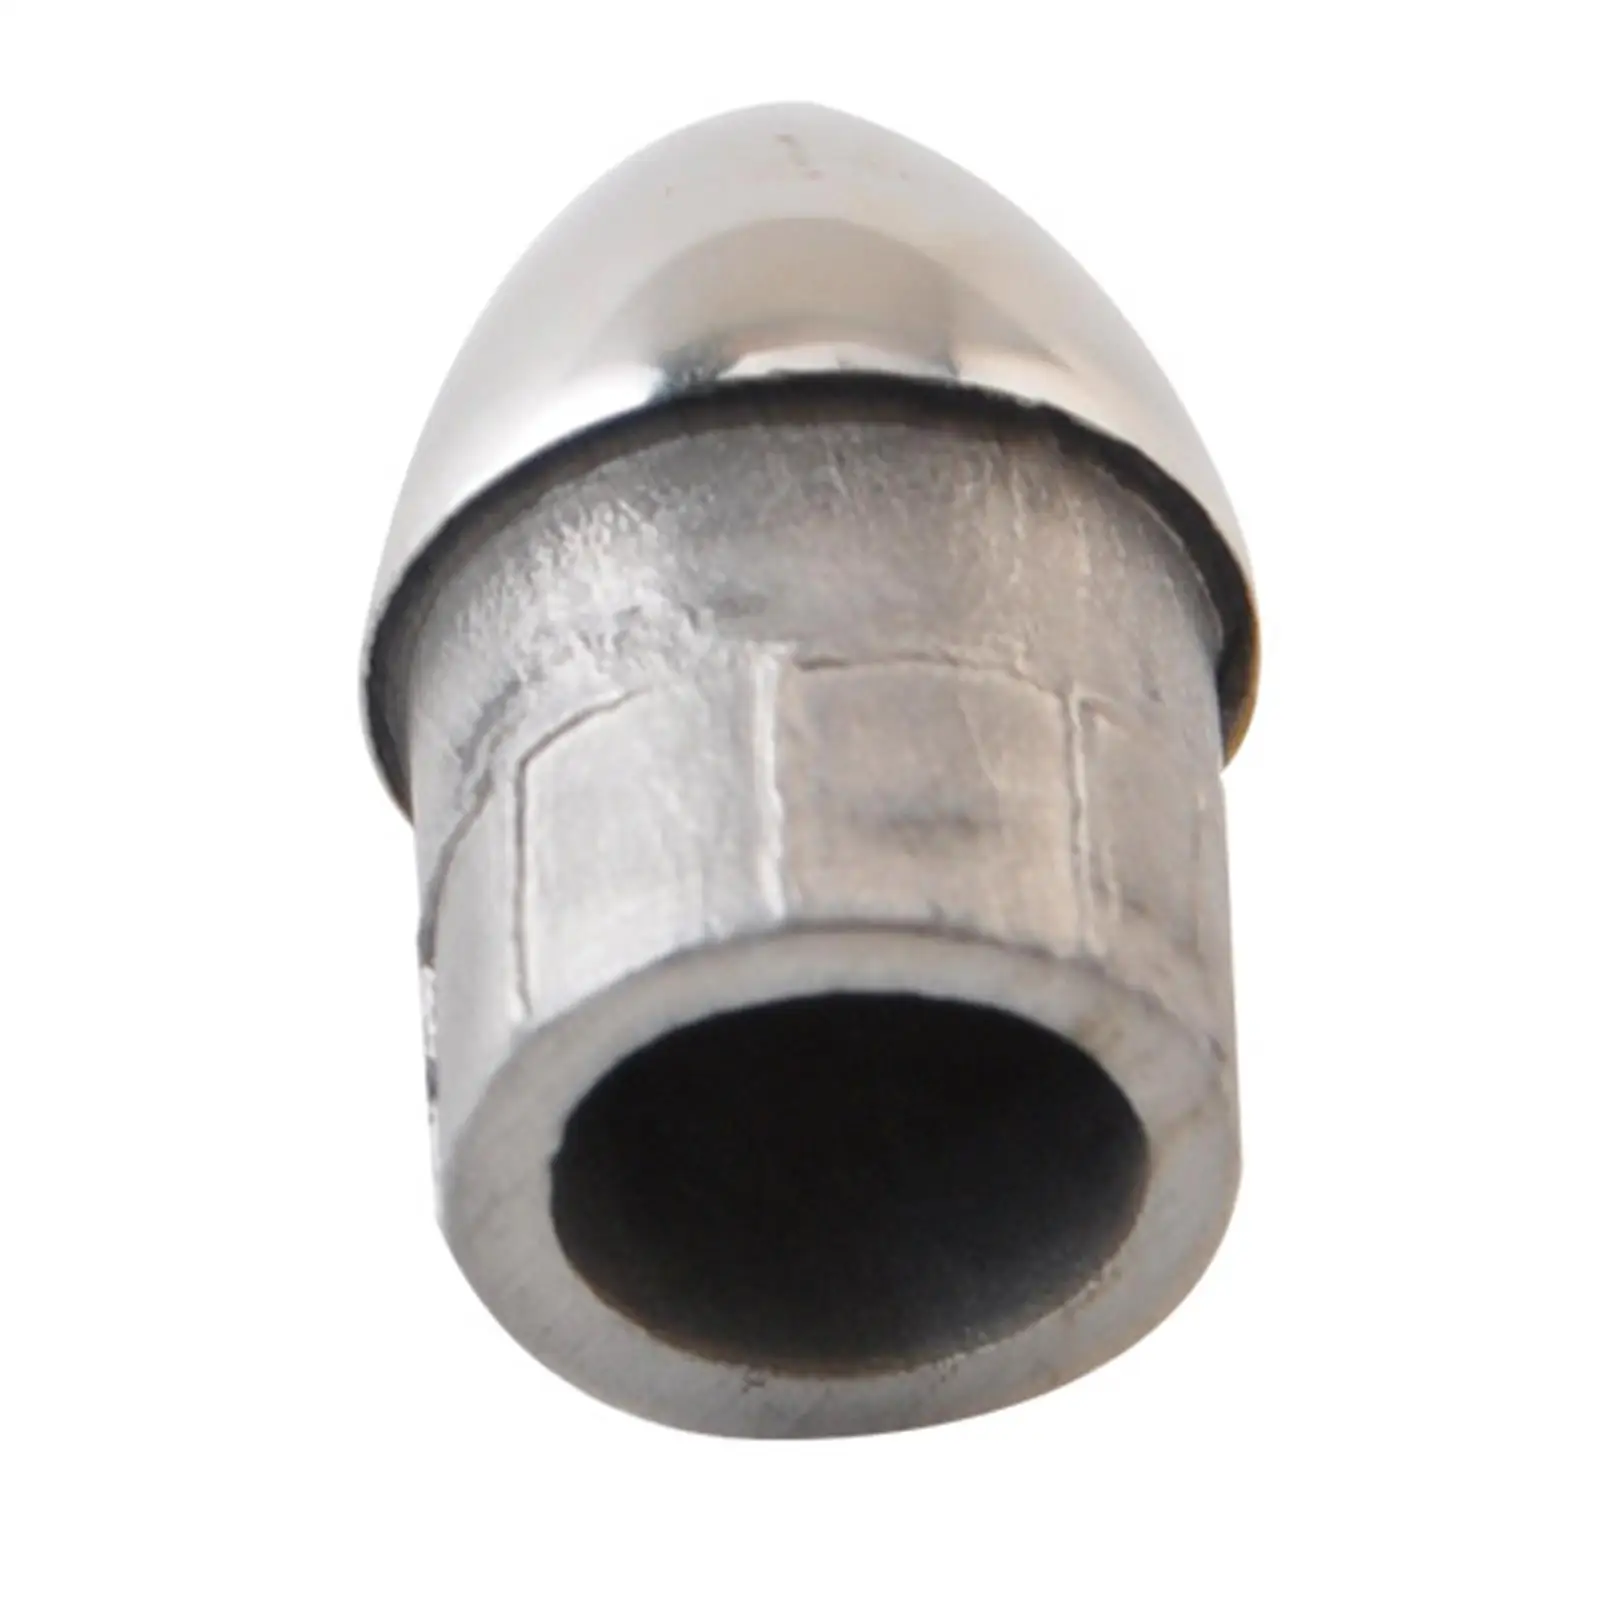 Boat Hand Rail Fitting Accessories High Performance for 7/8